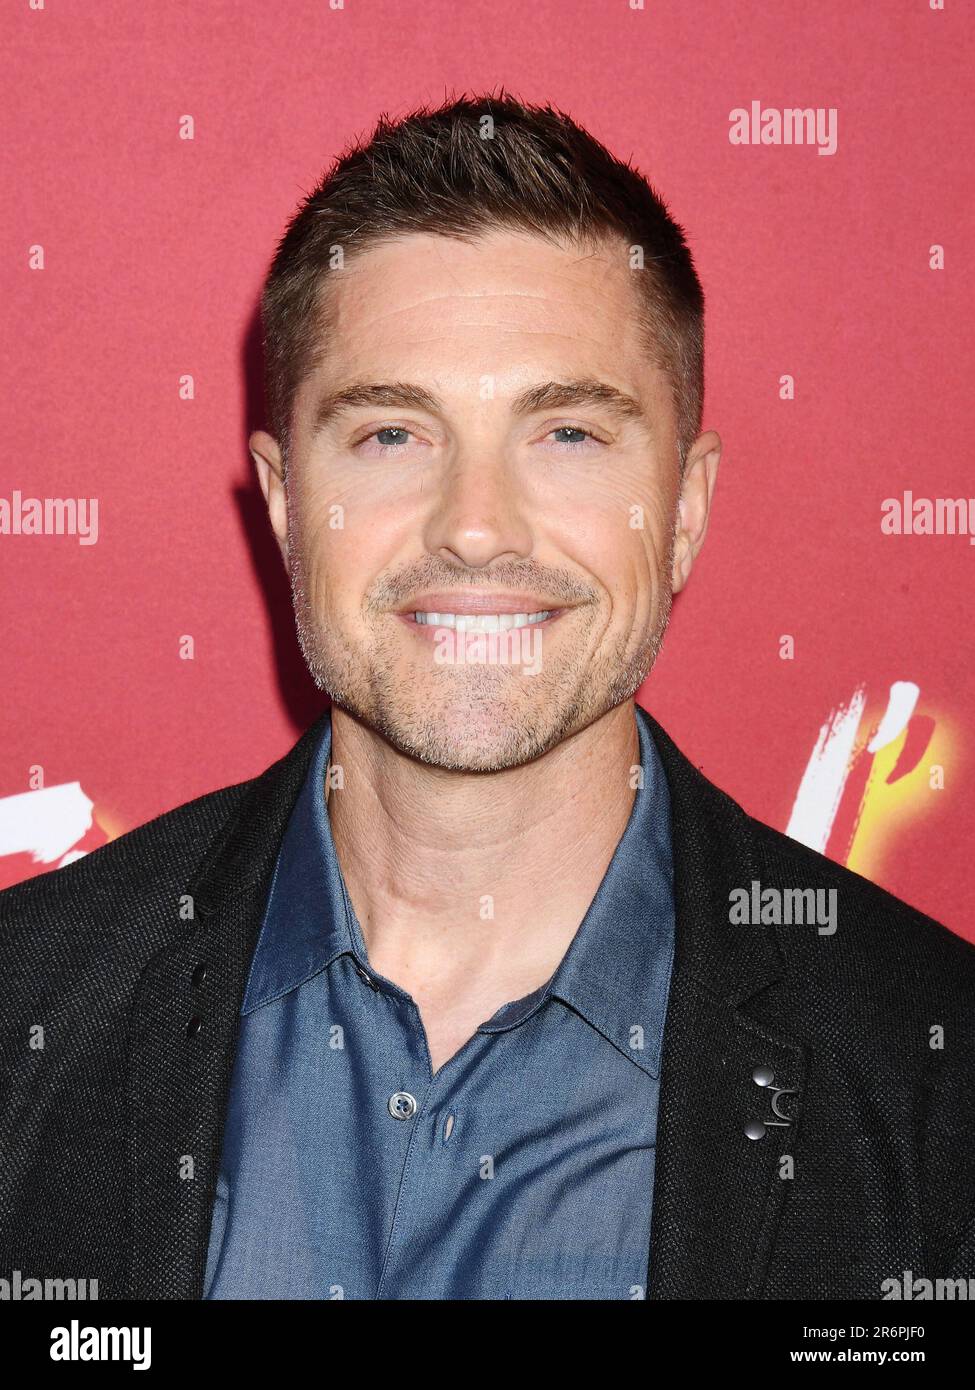 HOLLYWOOD, CALIFORNIA - JUNE 09: Eric Winter attends the special screening of Searchlight Pictures' 'Flamin' Hot' at Hollywood Post 43 - American Legi Stock Photo